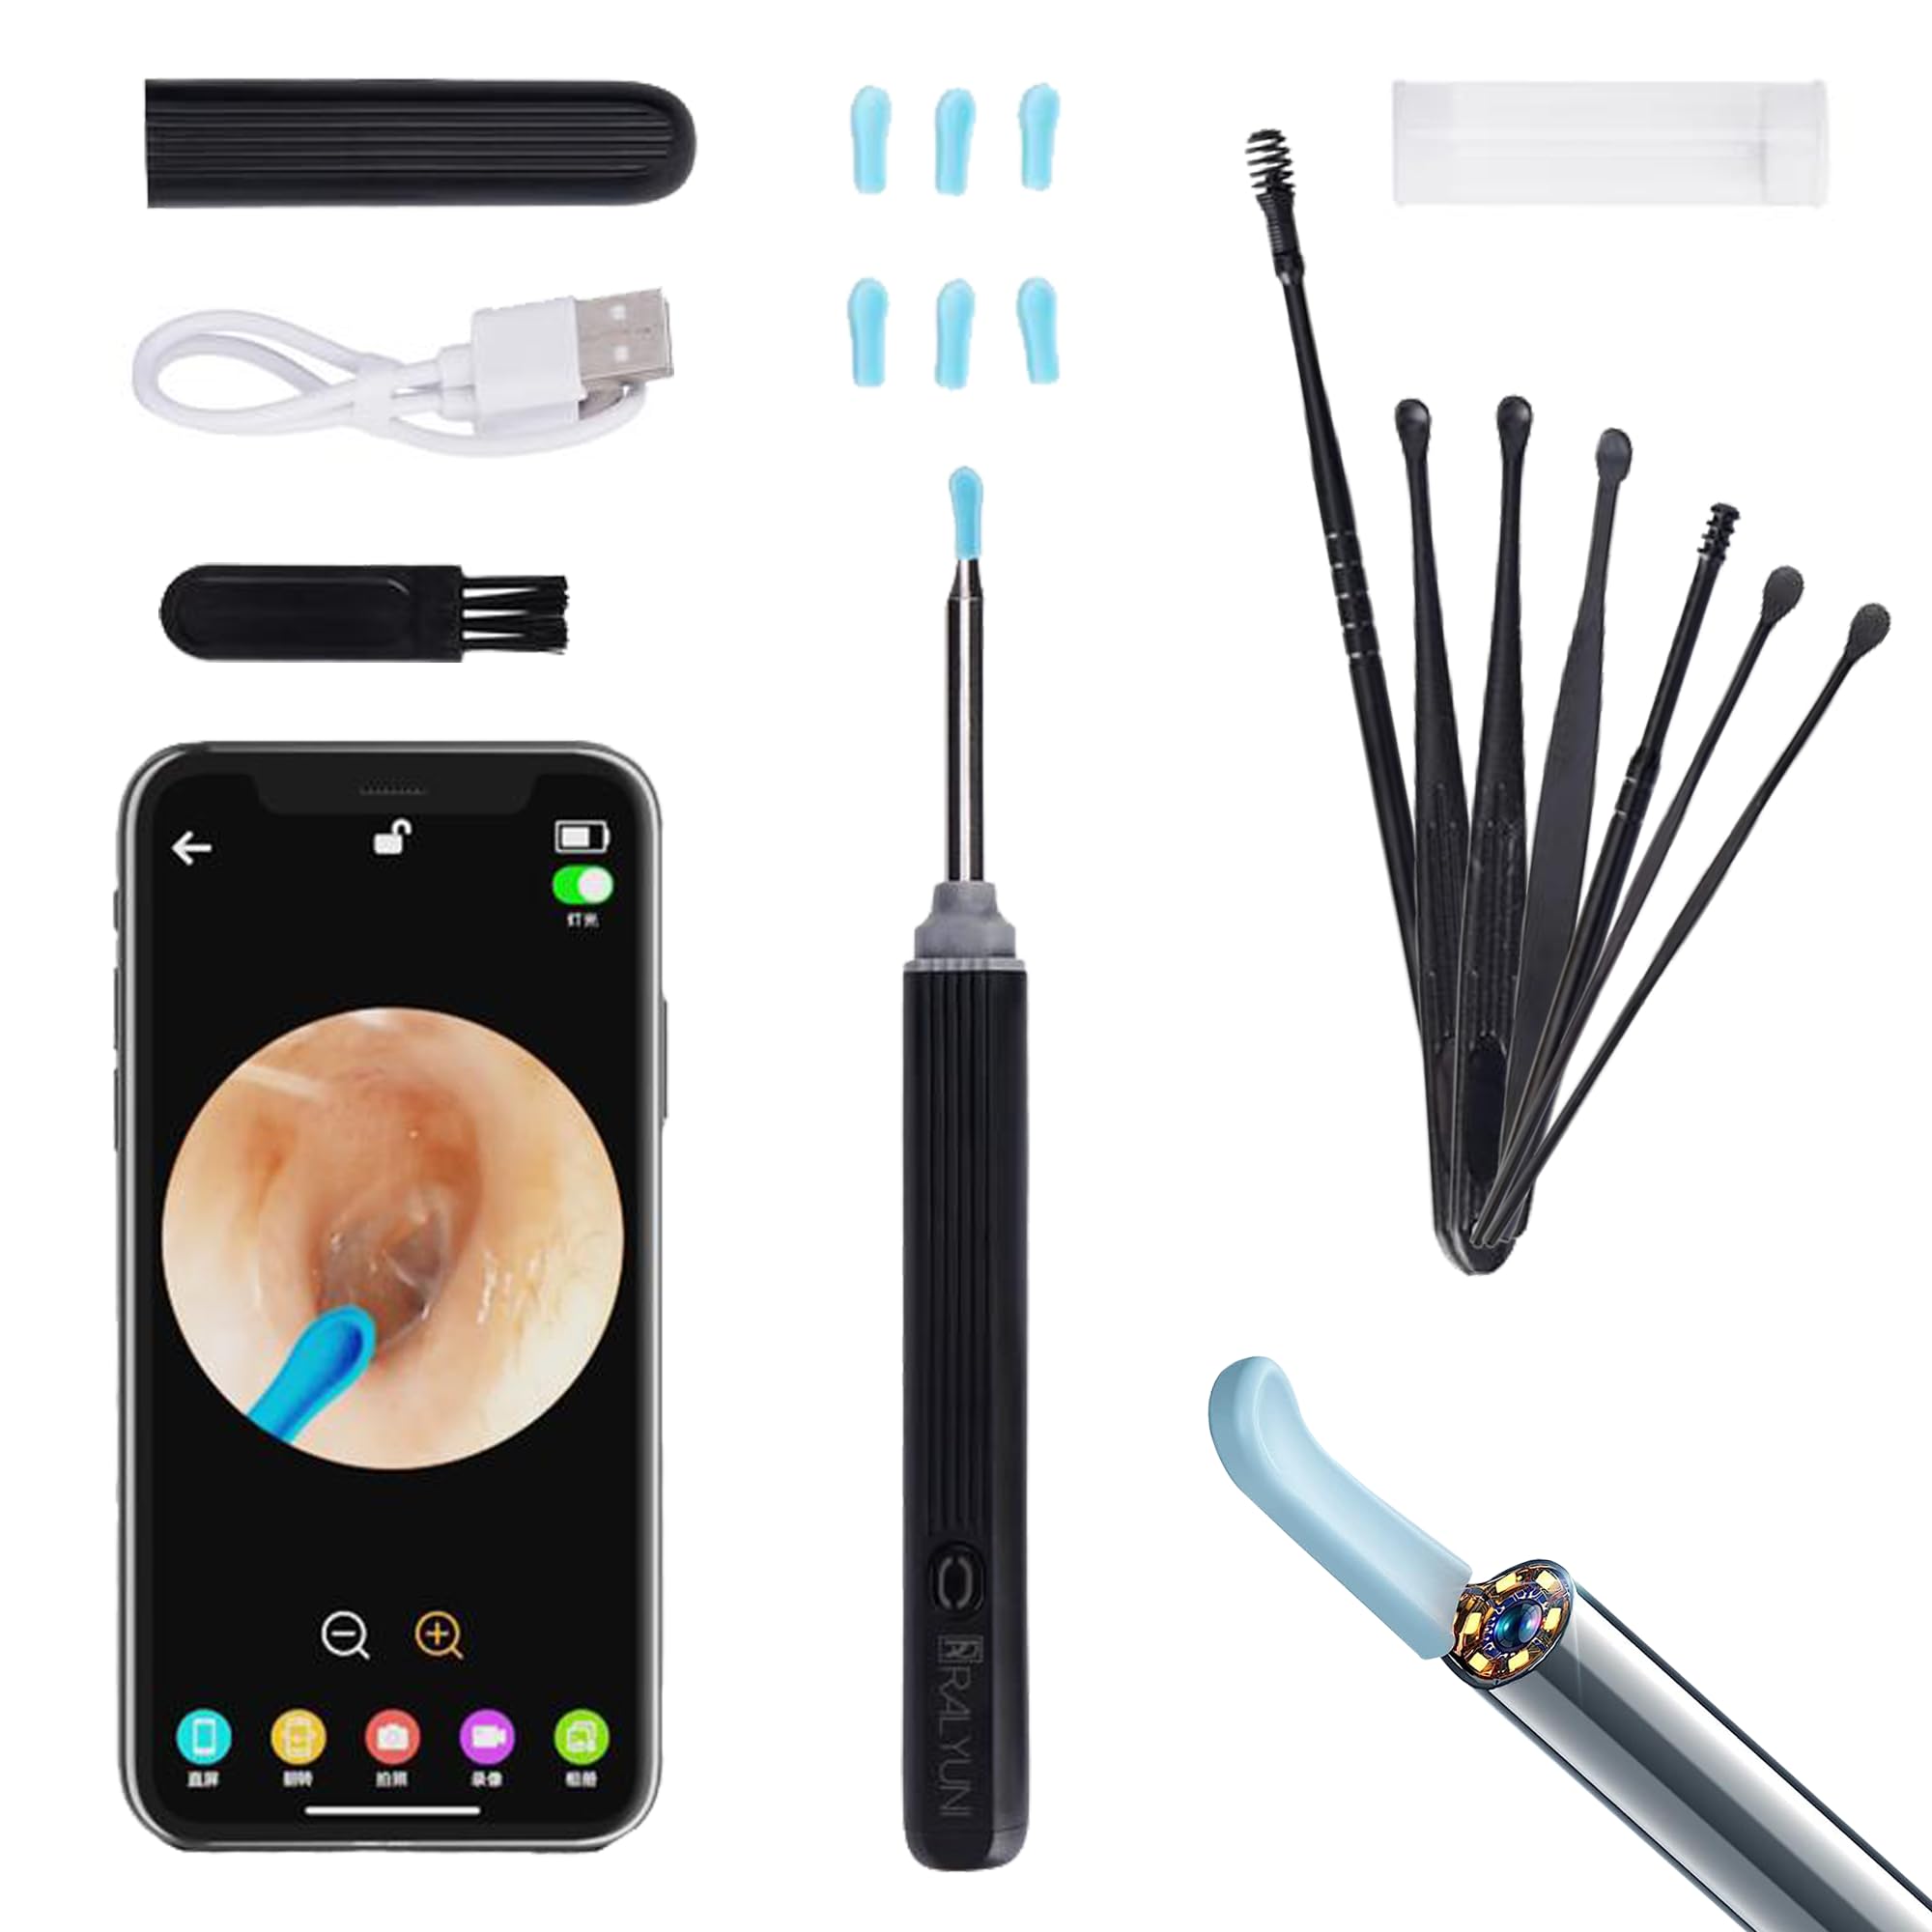 Ear Wax Removal with Camera, Ear Inspection System Wireless Earwax Removal Tool with Camera for Smart Devices